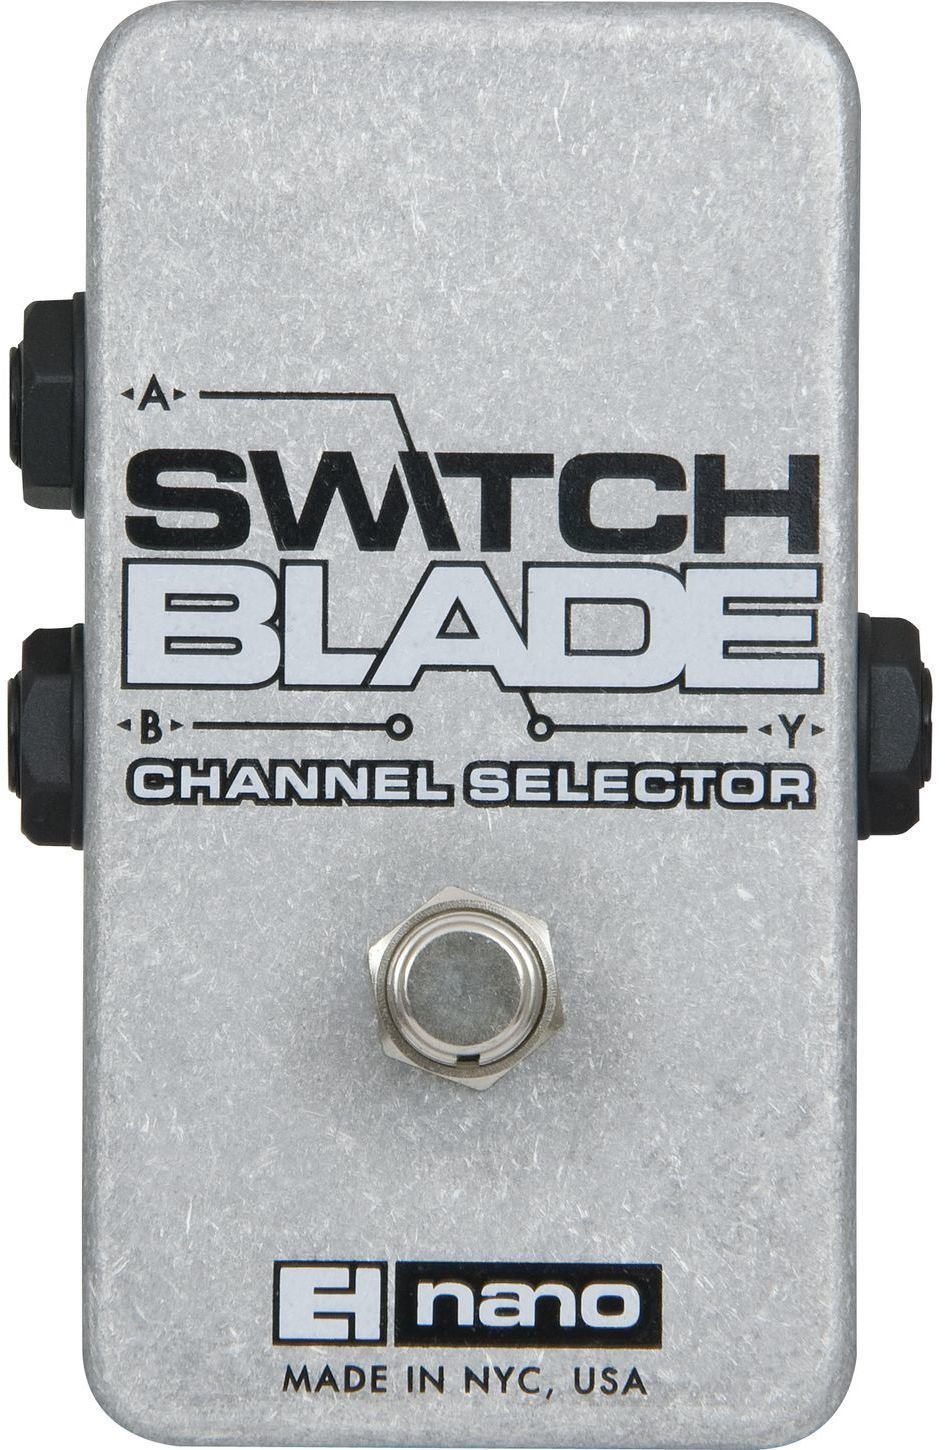 Footswitch Electro Harmonix Switchblade Footswitch